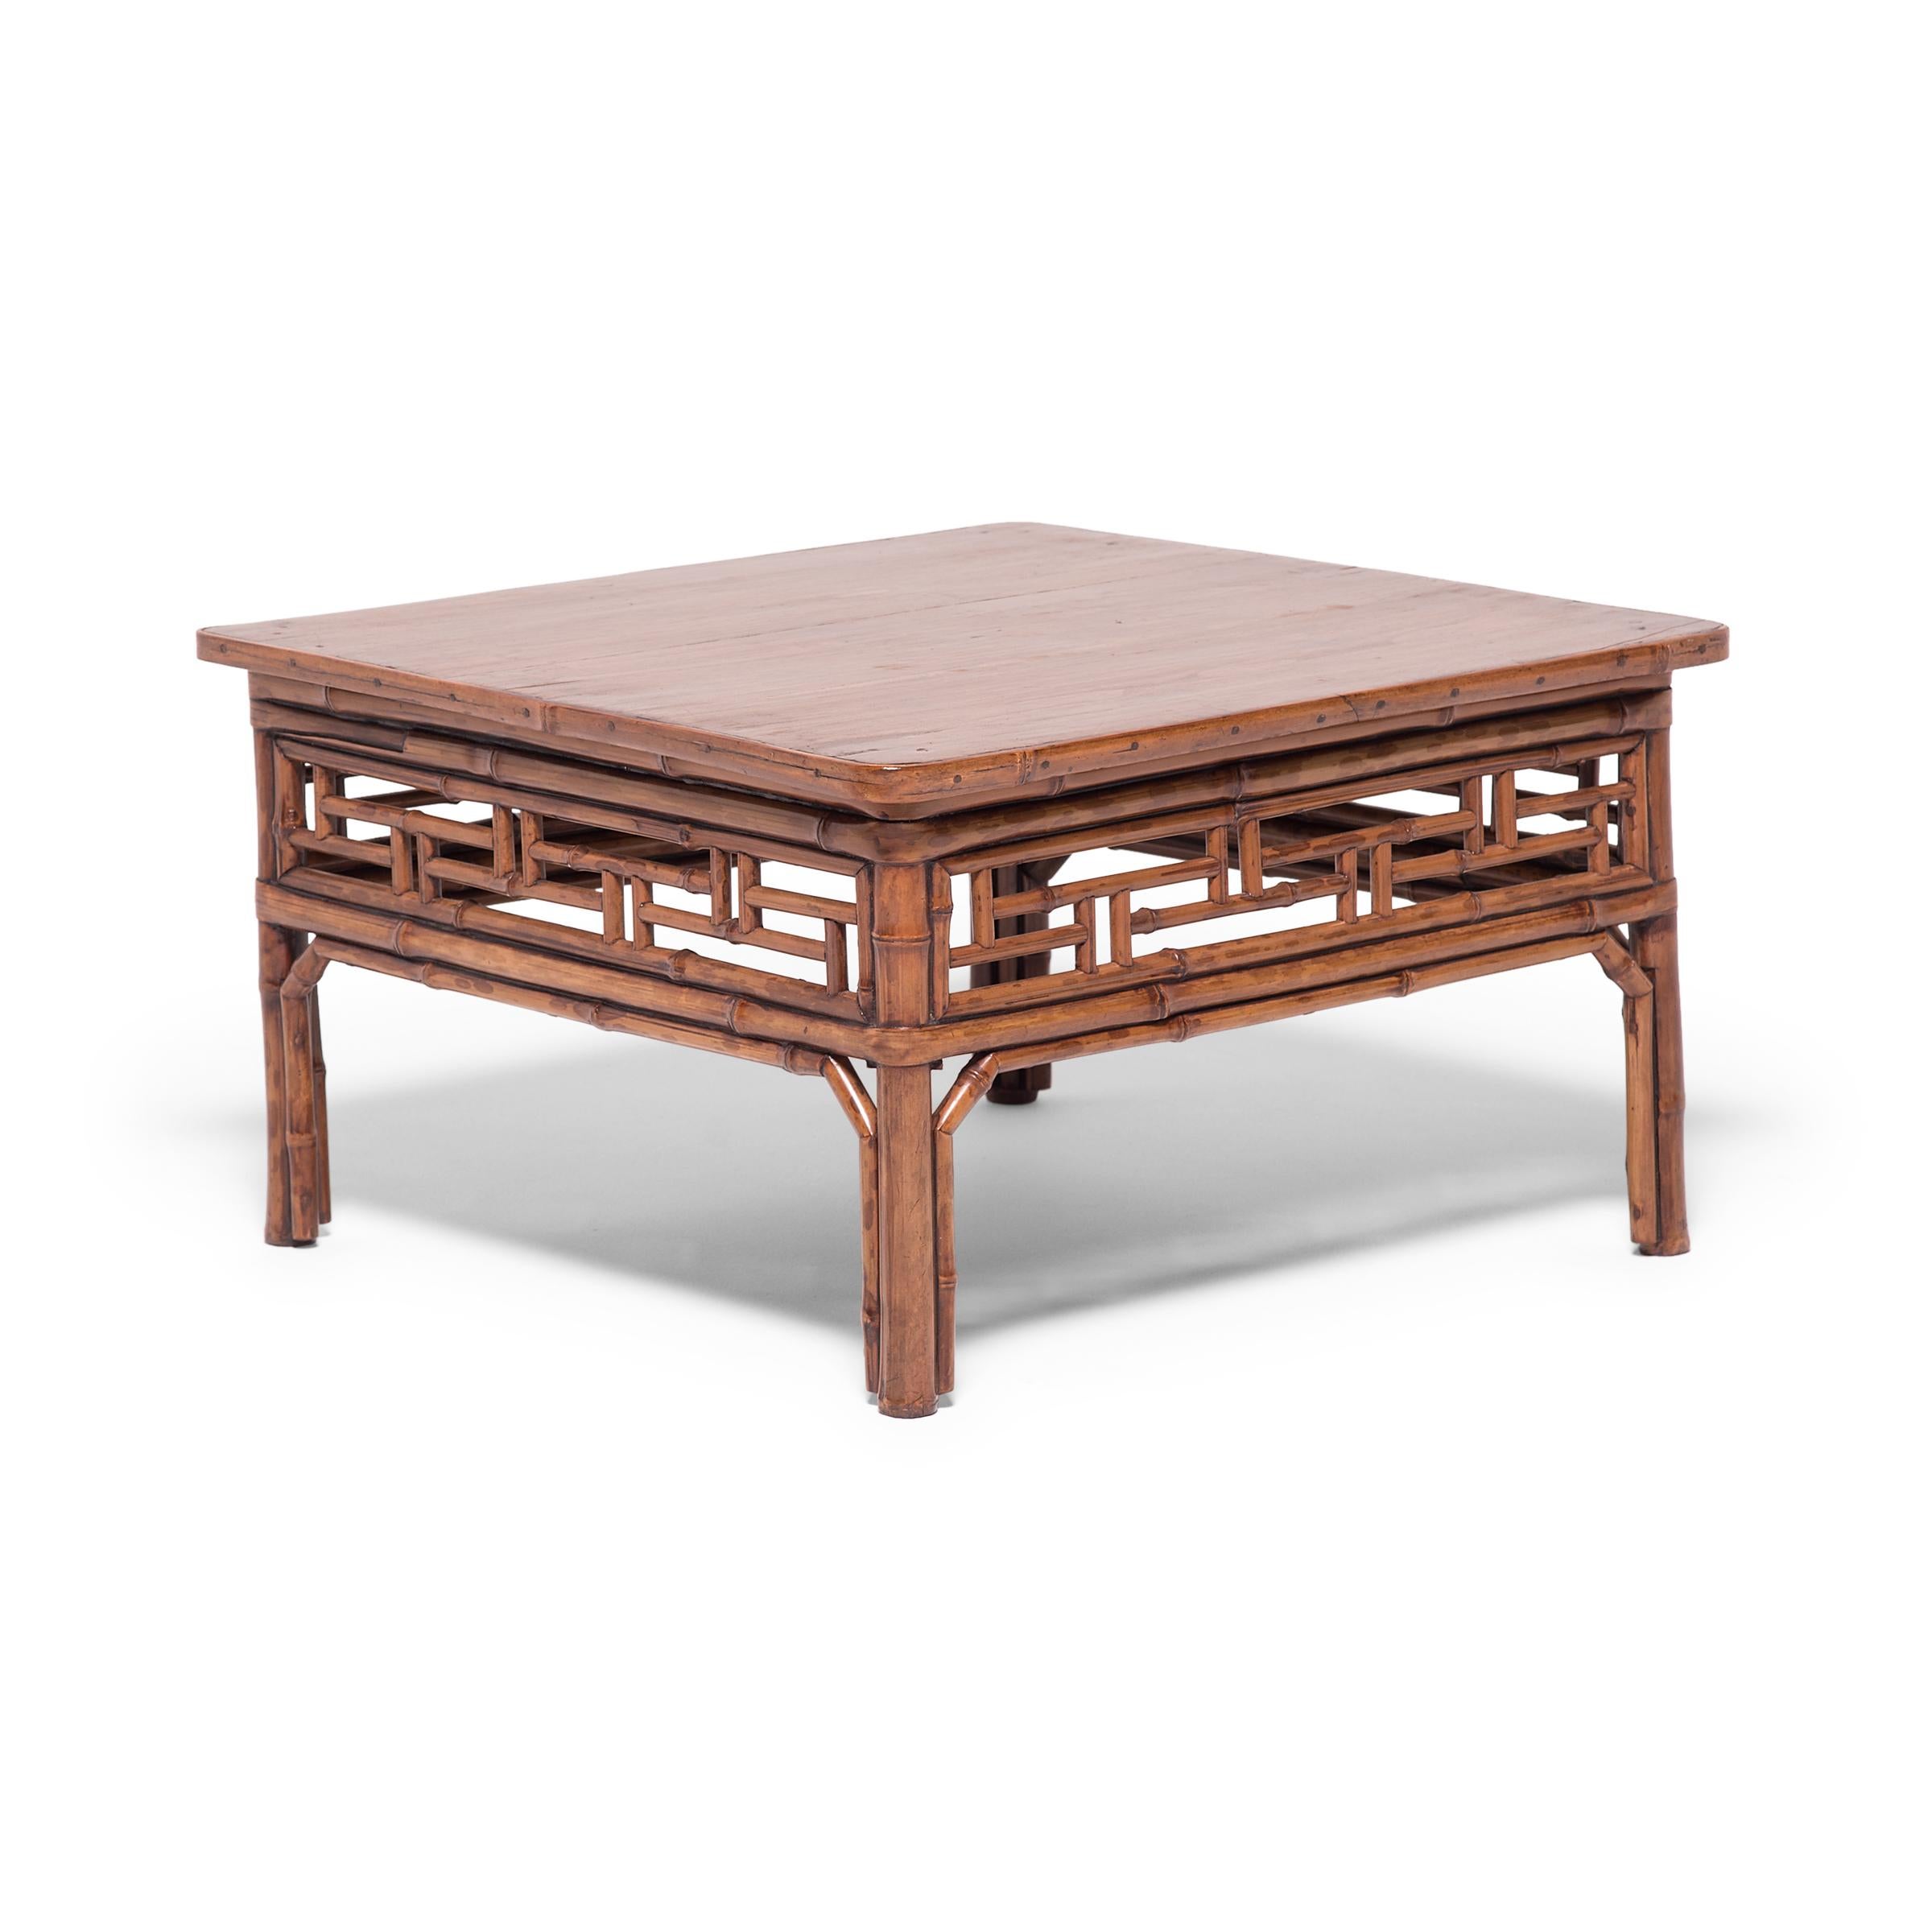 This 19th century low square table from southern China is built from spotted bamboo. It is brilliantly constructed with a geometric fretwork apron and legs held in place with double wraparound stretchers. Creating furniture from bamboo was a